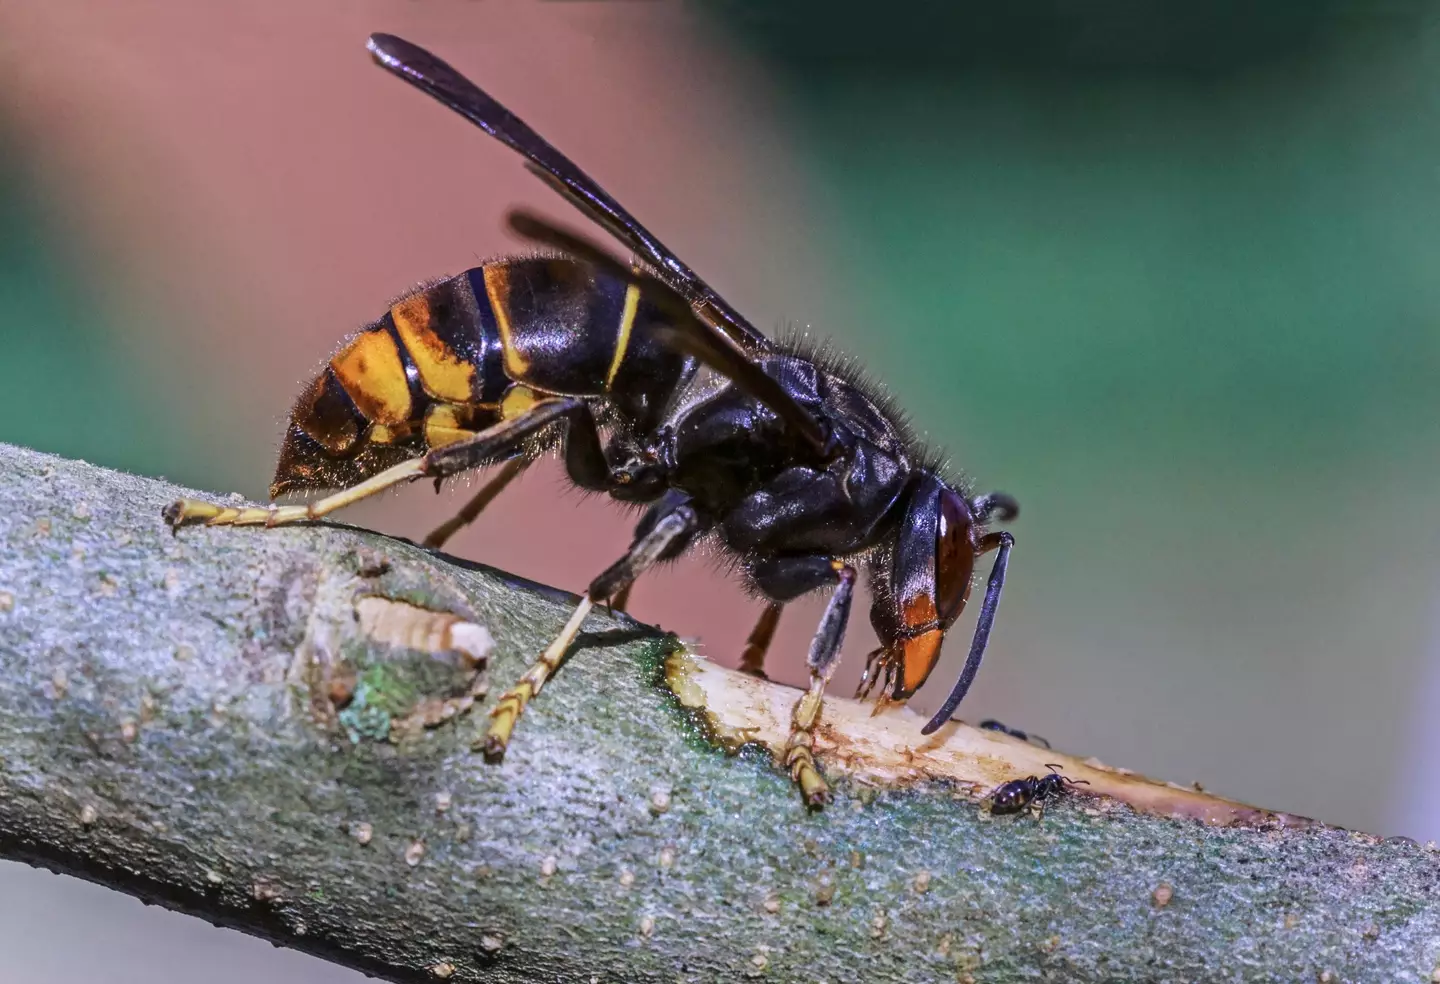 It's not the first time Asian hornets have been spotted in the UK.